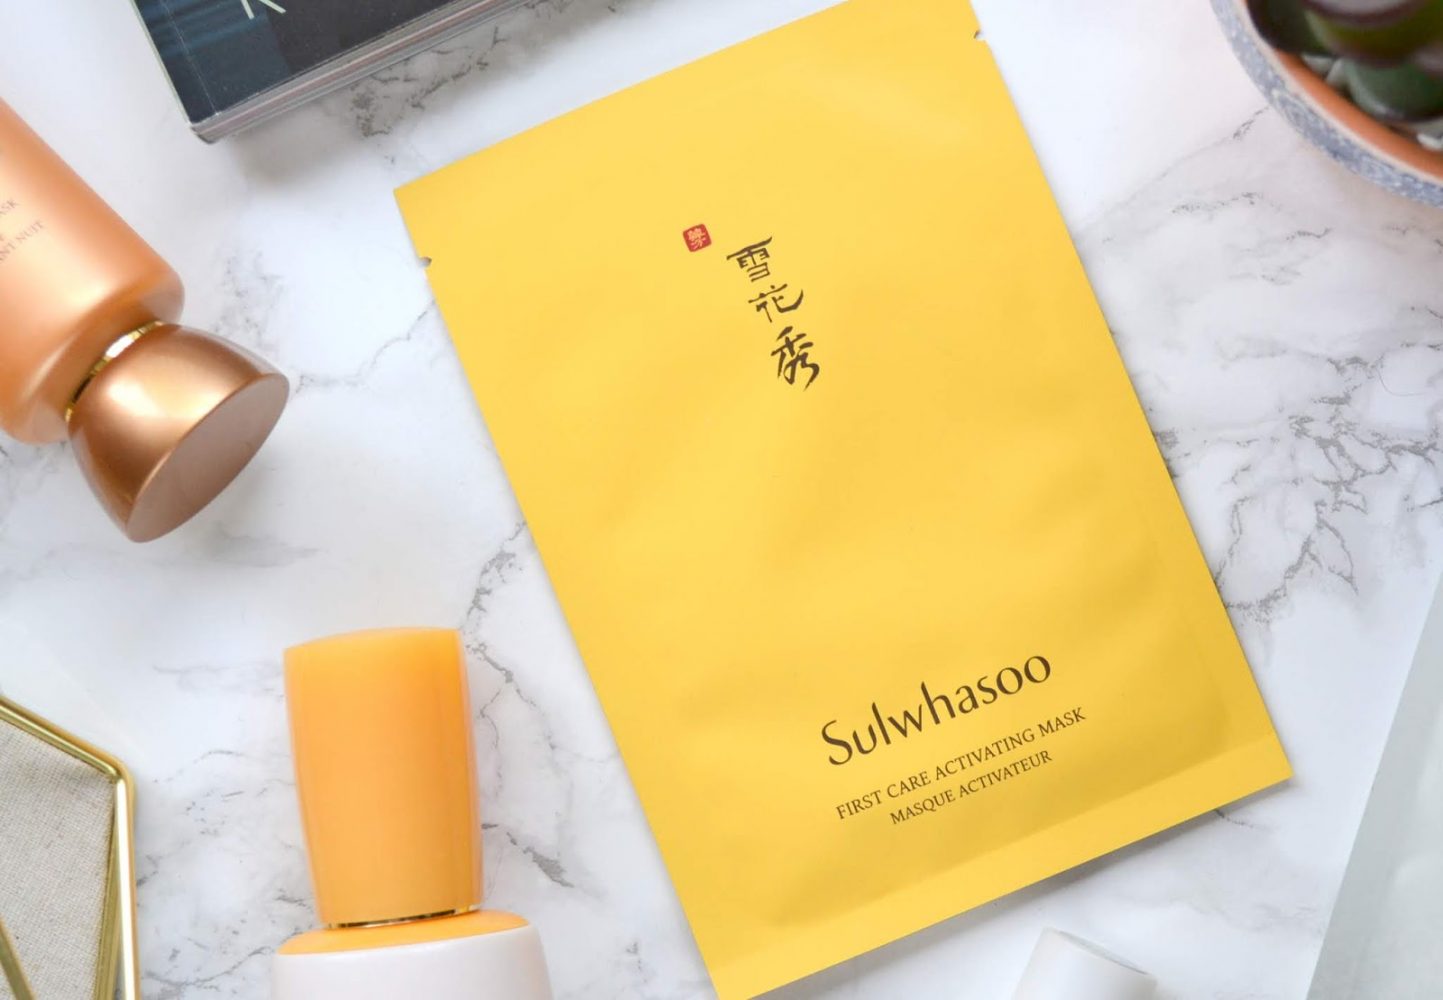 Mặt nạ tốt nhất hiện nay: Mặt nạ Sulwhasoo First Care Activating Sheet Mask